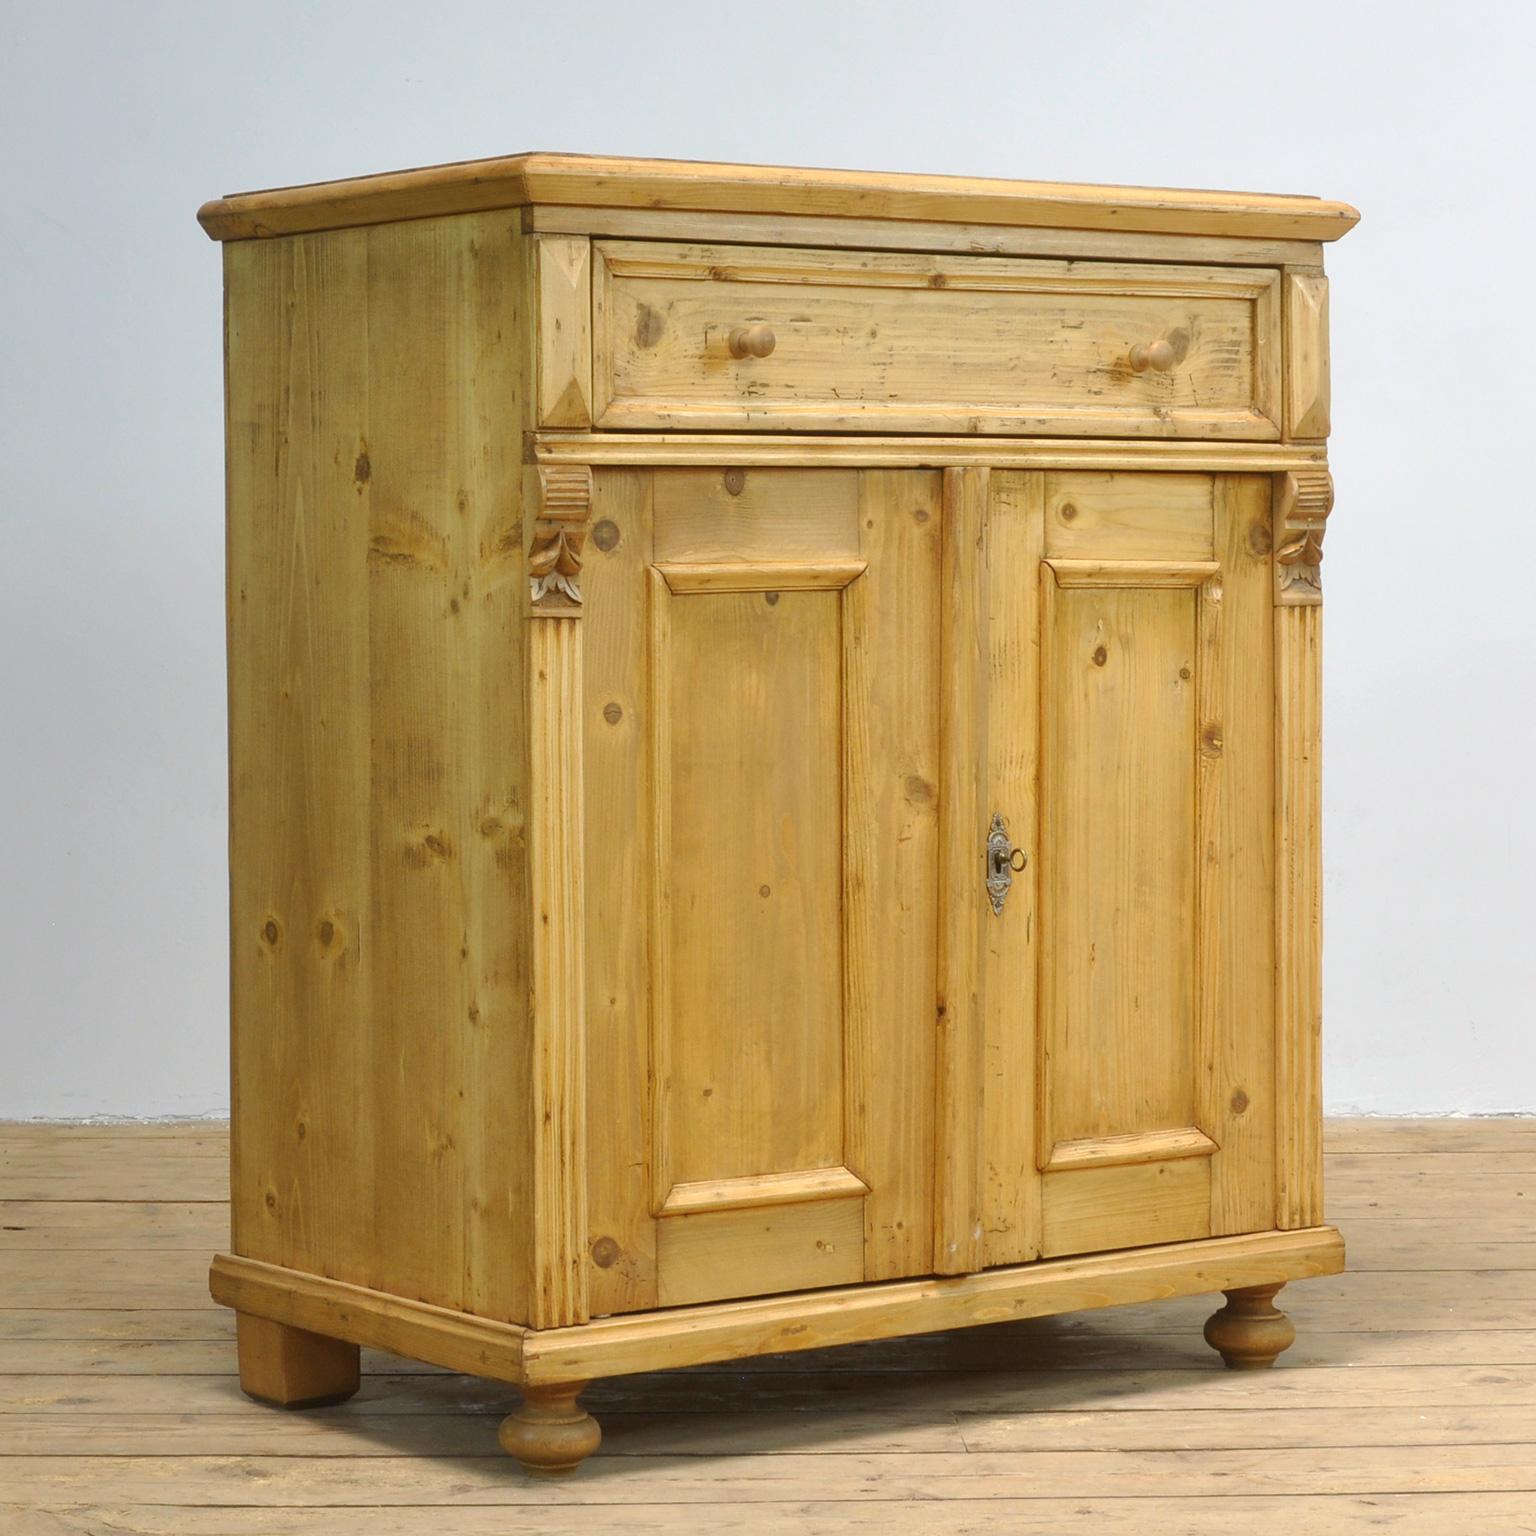 Dresser made of pine. Produced in the 1930s with a drawer and a shelf inside.